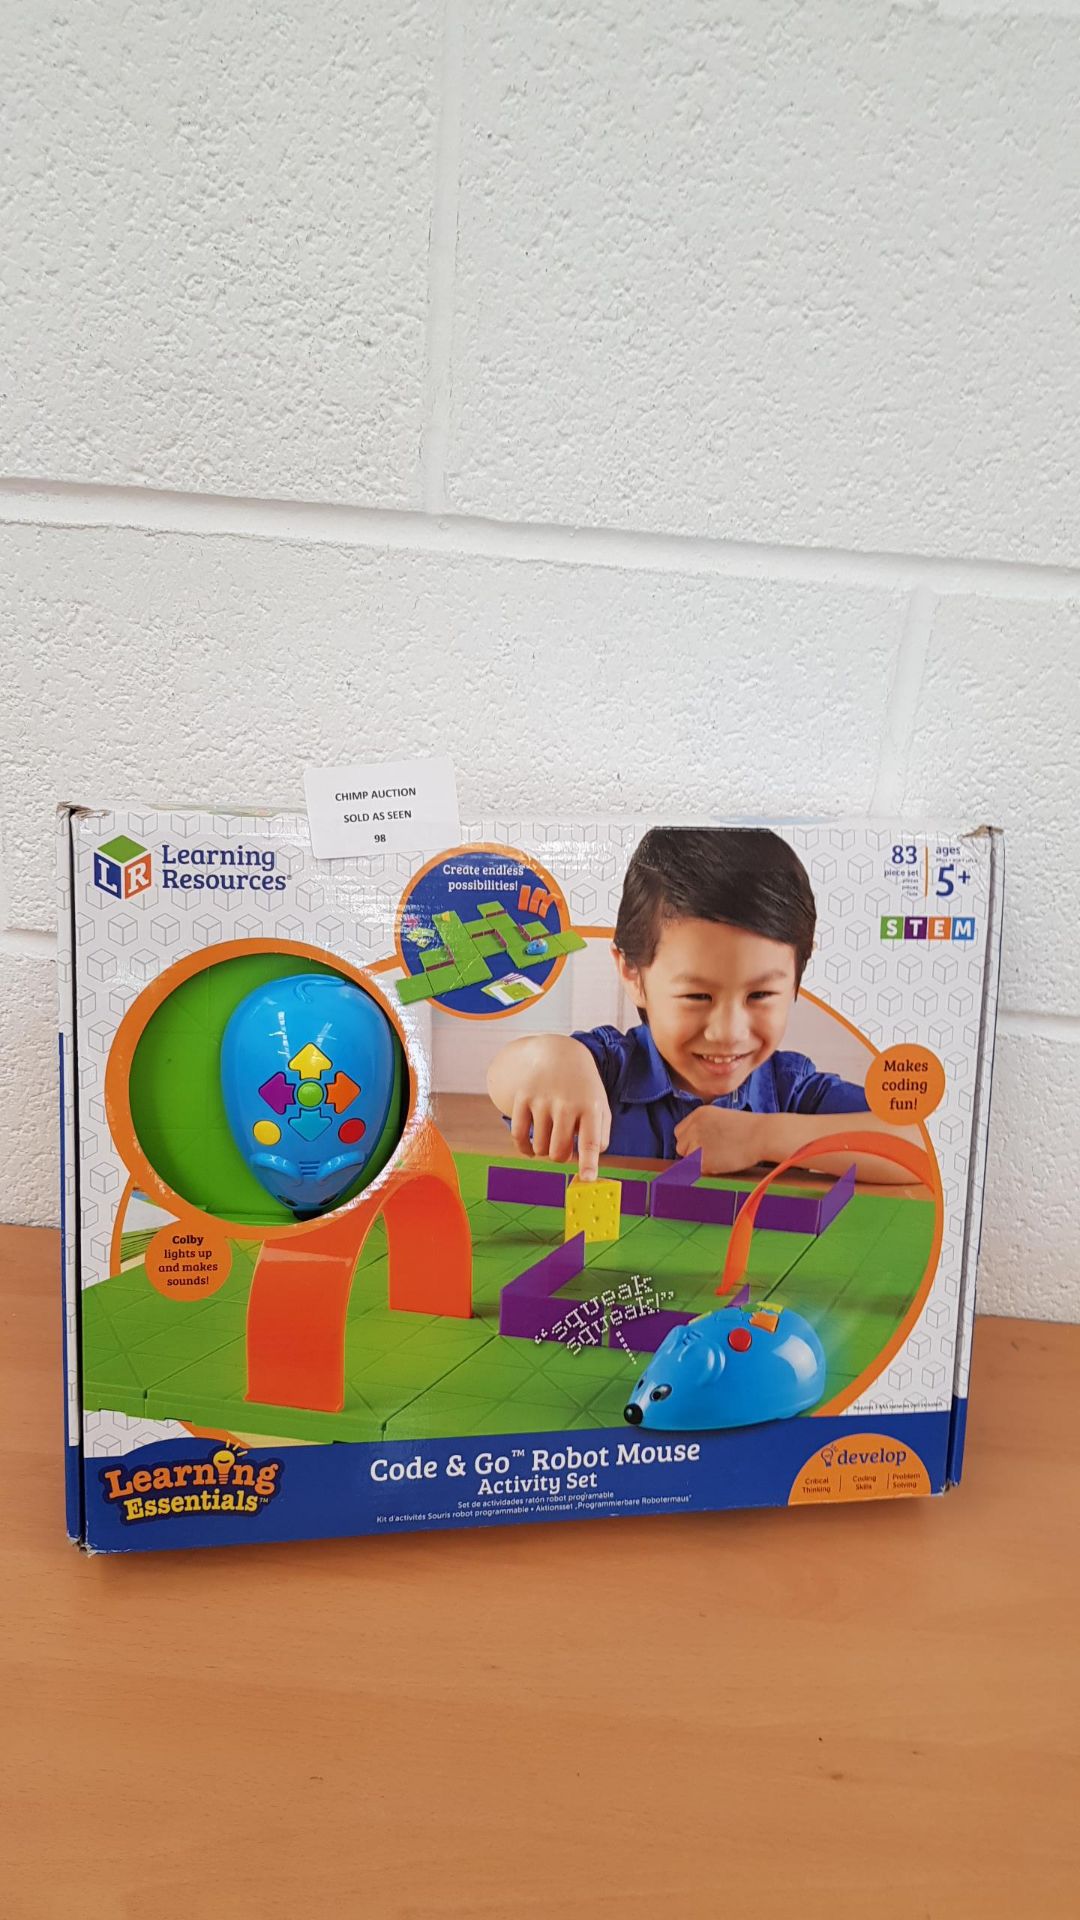 Learning Resources Robot Mouse Activity Set RRP £129.99